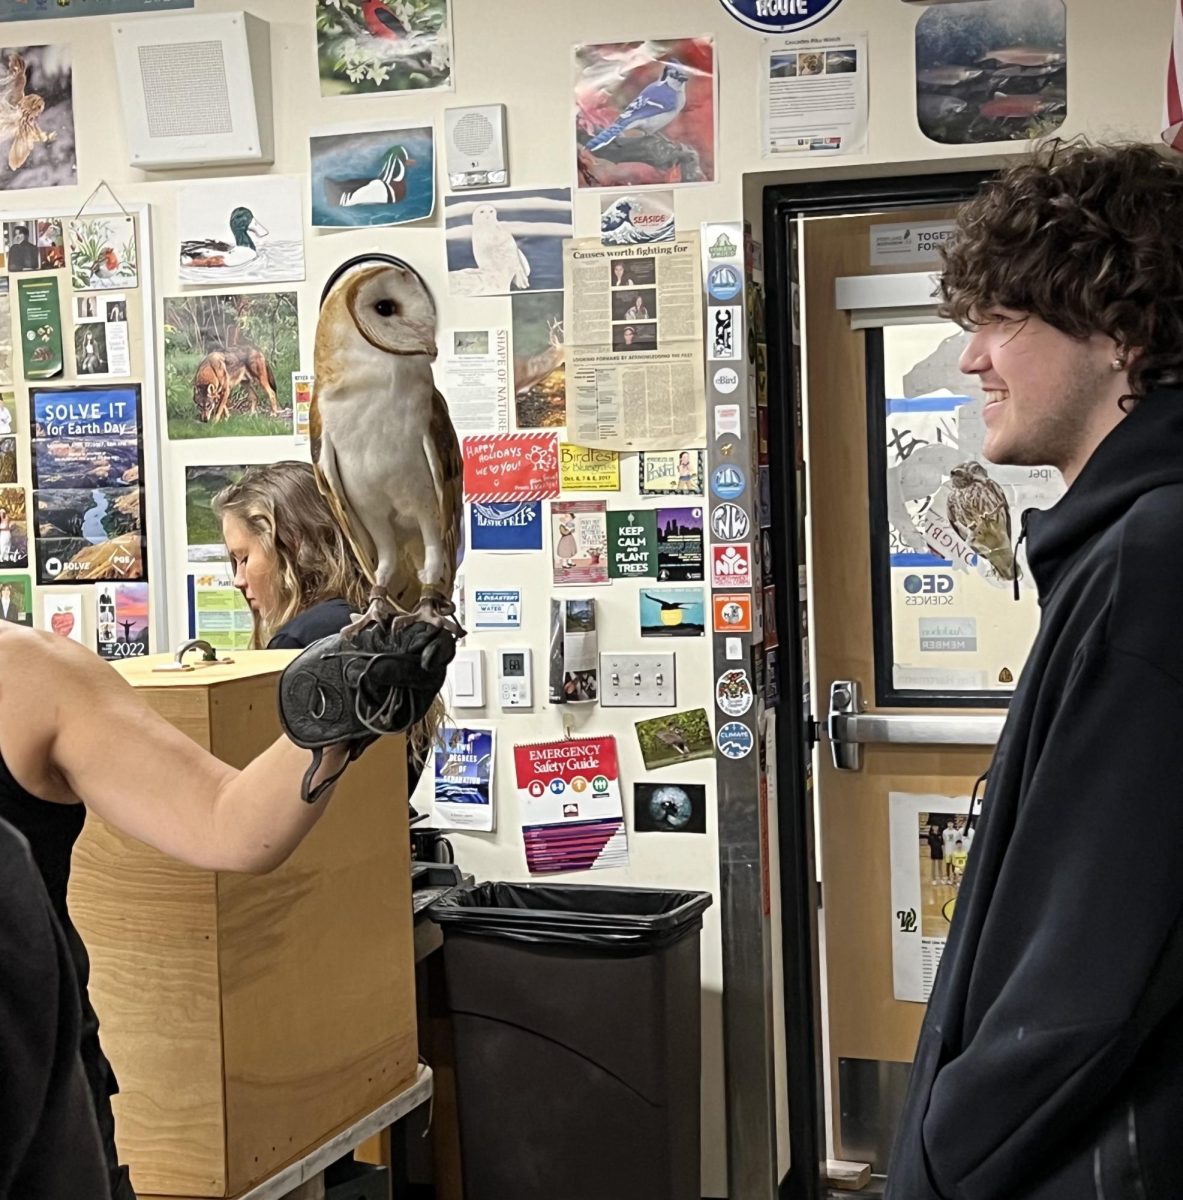 Falcons have been proven to engage students in a classroom environment.